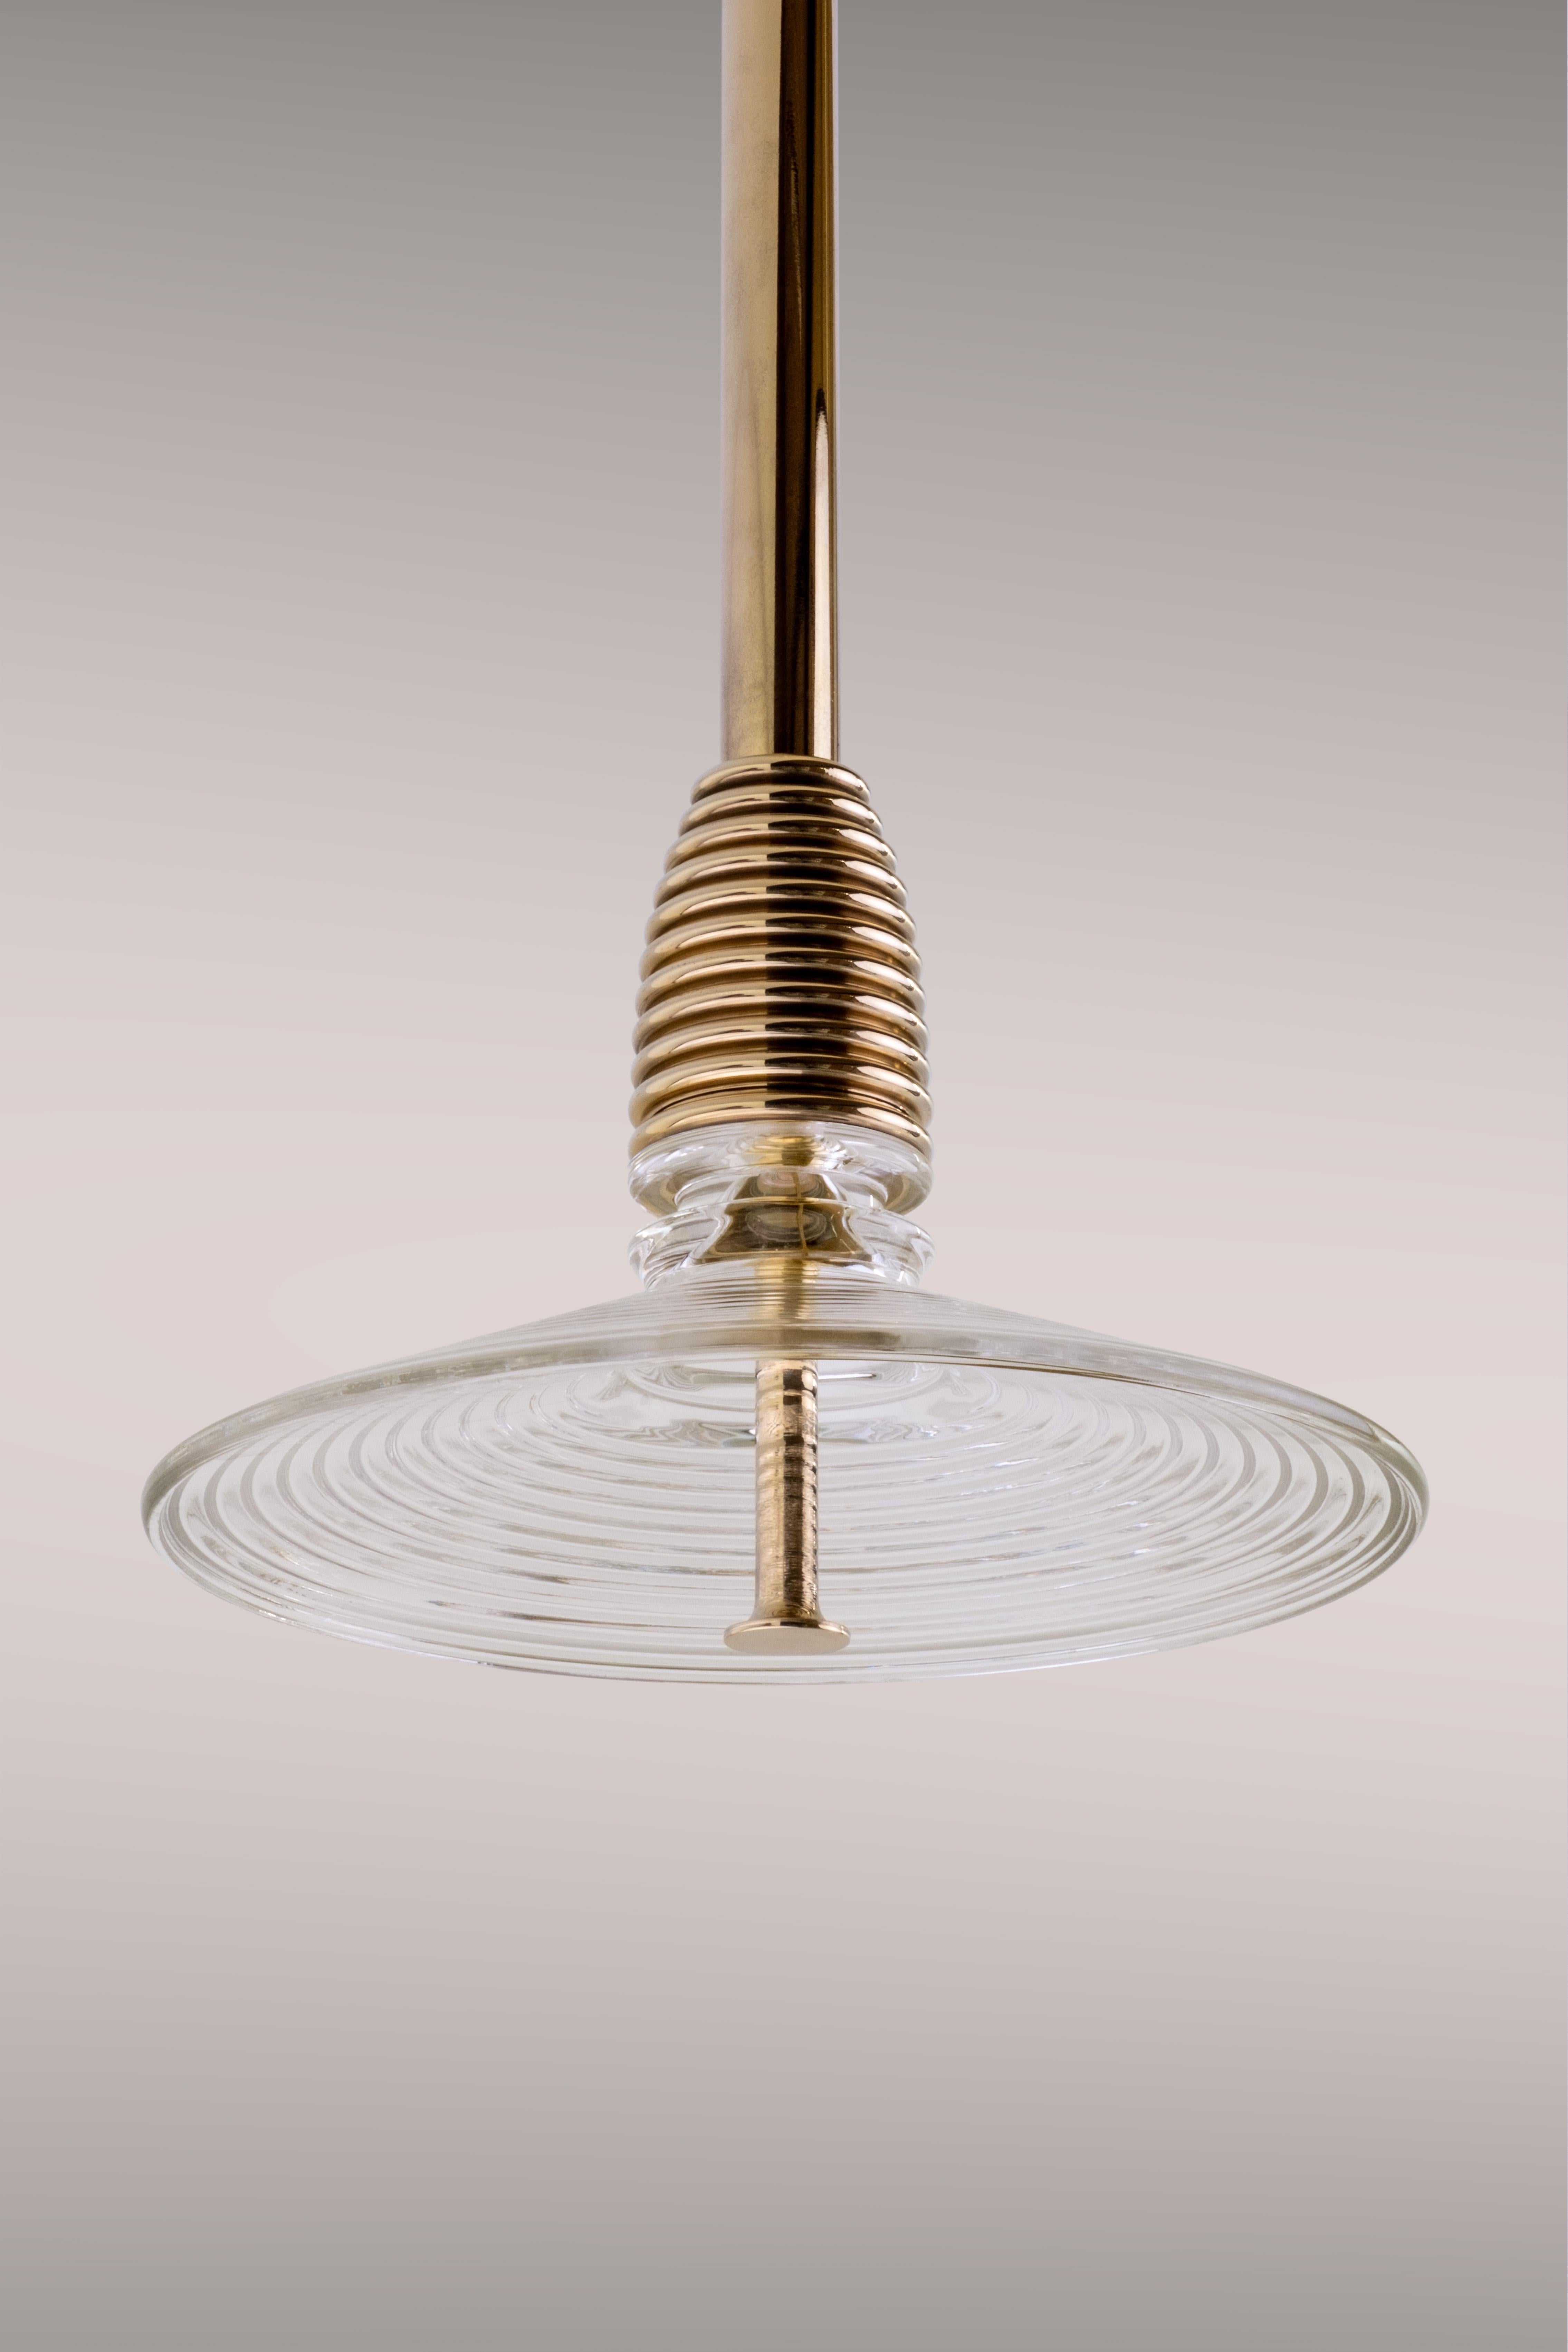 Art Deco The Insulator 'B' Pendant in dark brass and frosted glass by NOVOCASTRIAN deco For Sale